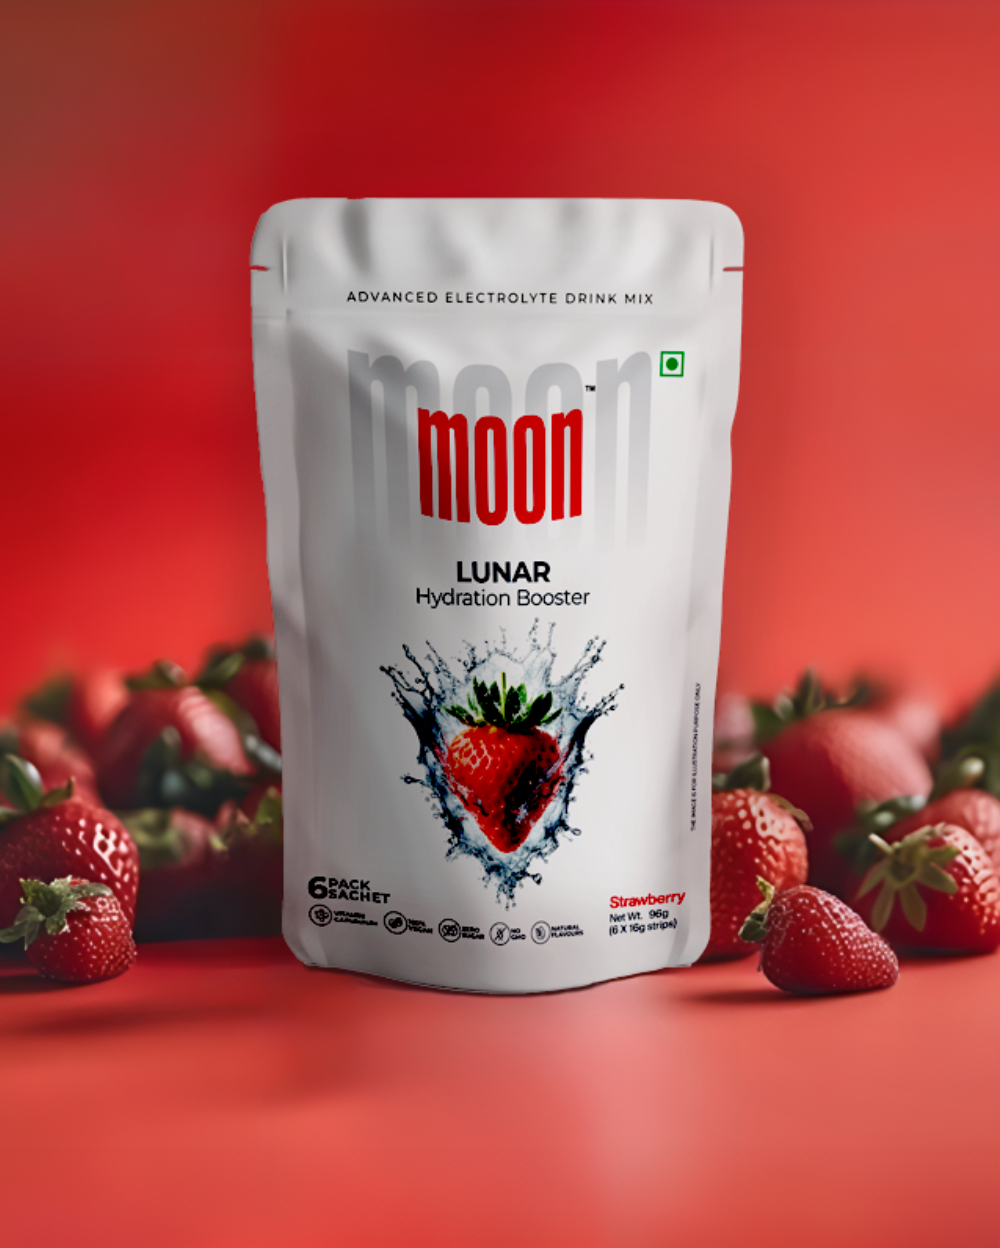 Product display of a MOONFREEZE FOODS PRIVATE LIMITED Moon Lunar Strawberry + Lychee Hydration Booster drink mix with a strawberry lychee flavor, surrounded by strawberries on a red background.